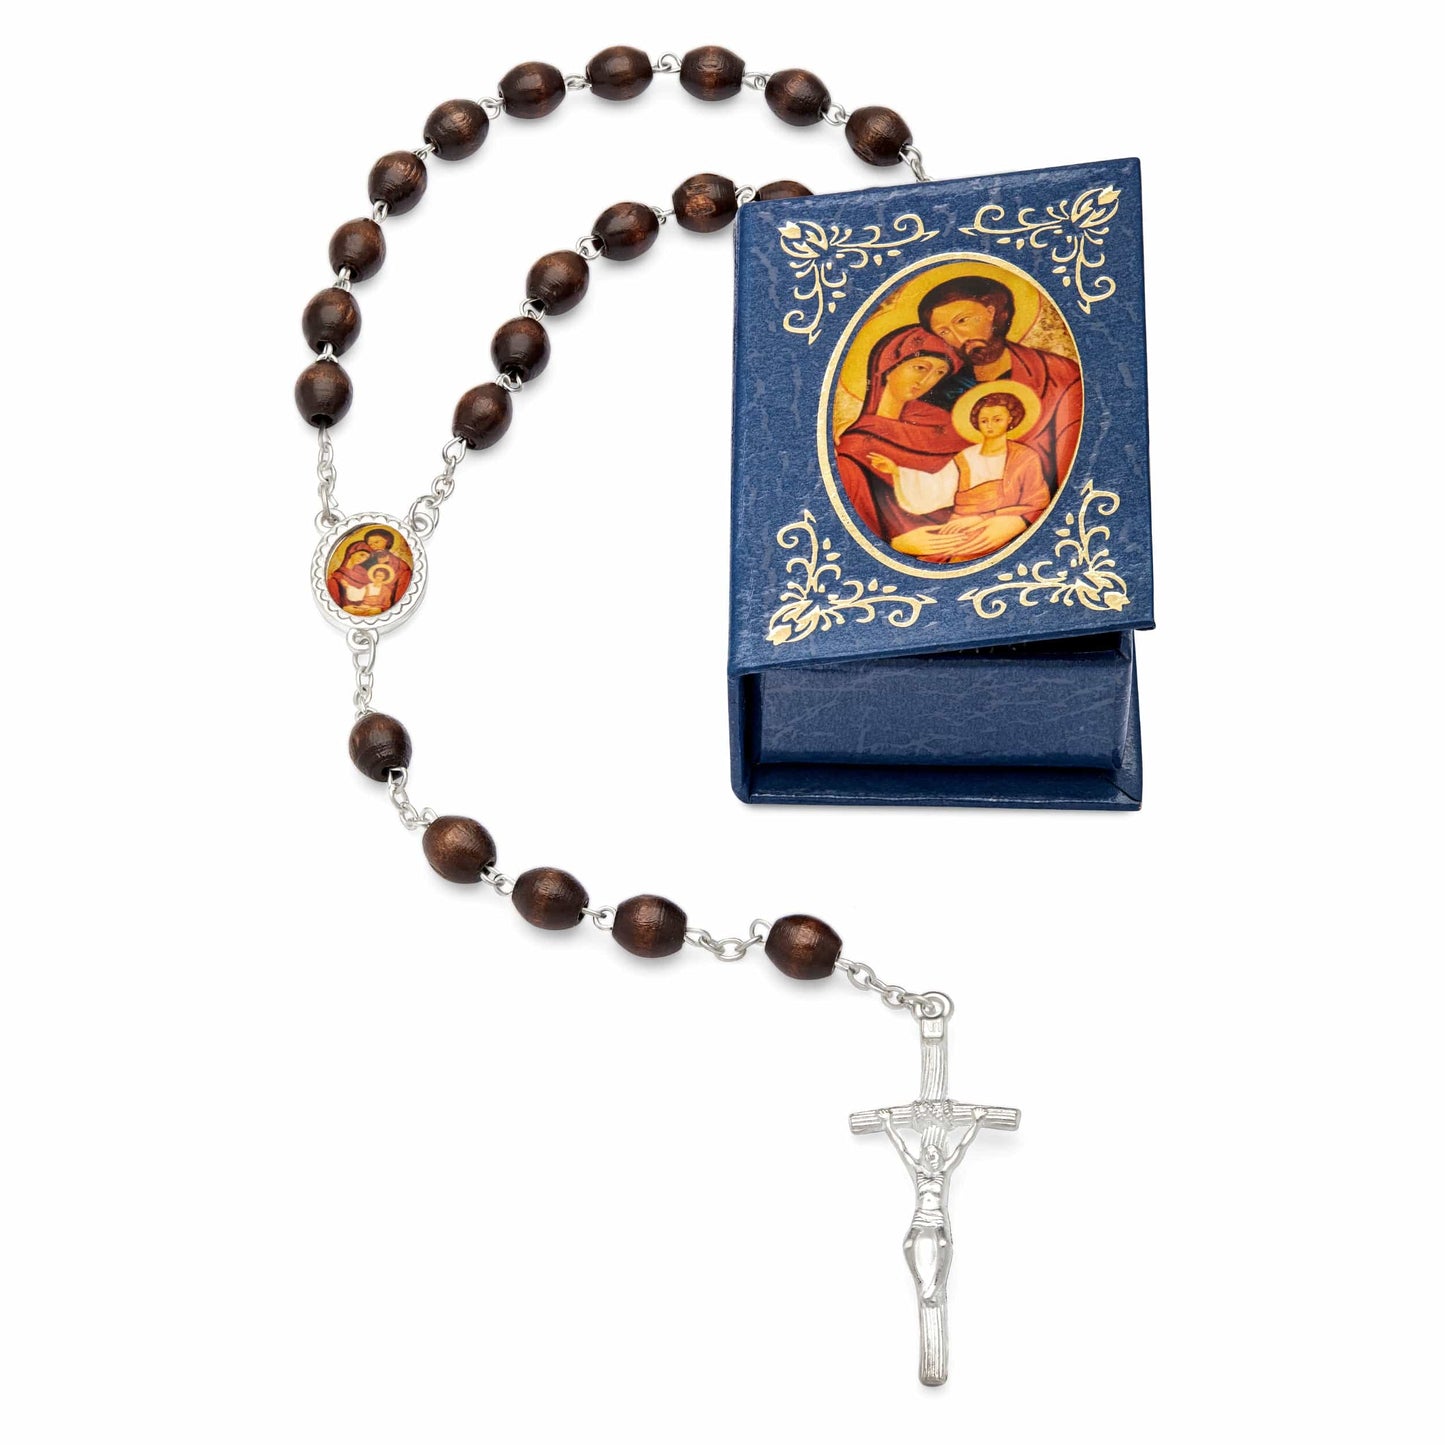 MONDO CATTOLICO Prayer Beads 53 cm (20.90 in) / 7 mm (0.30 in) Holy Family Blue Case and Rosary